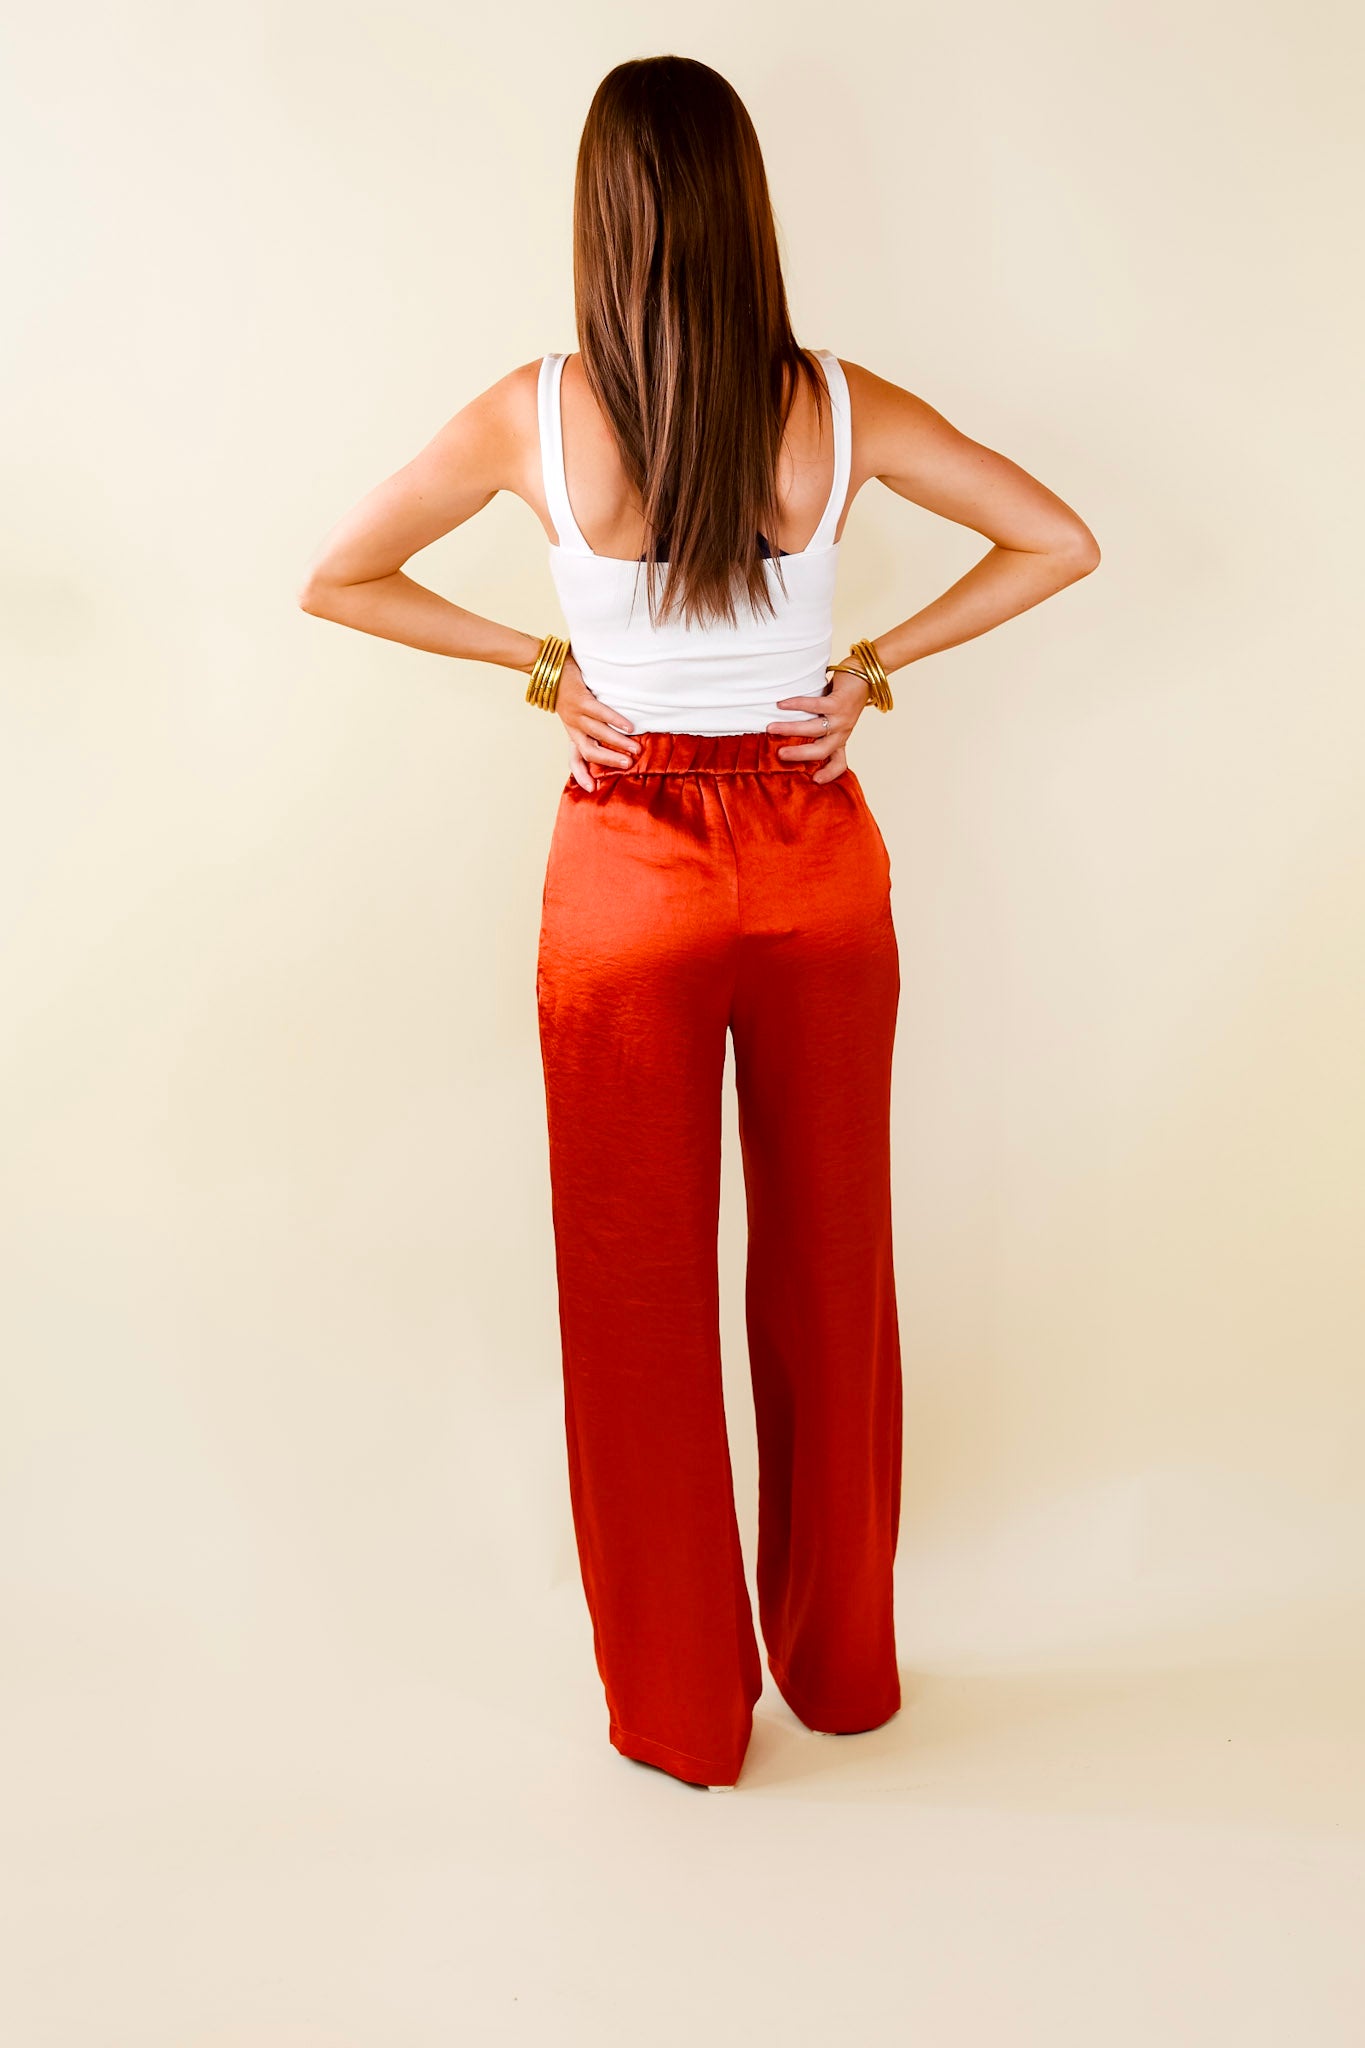 My Everything Satin Pants in Rust Orange - Giddy Up Glamour Boutique